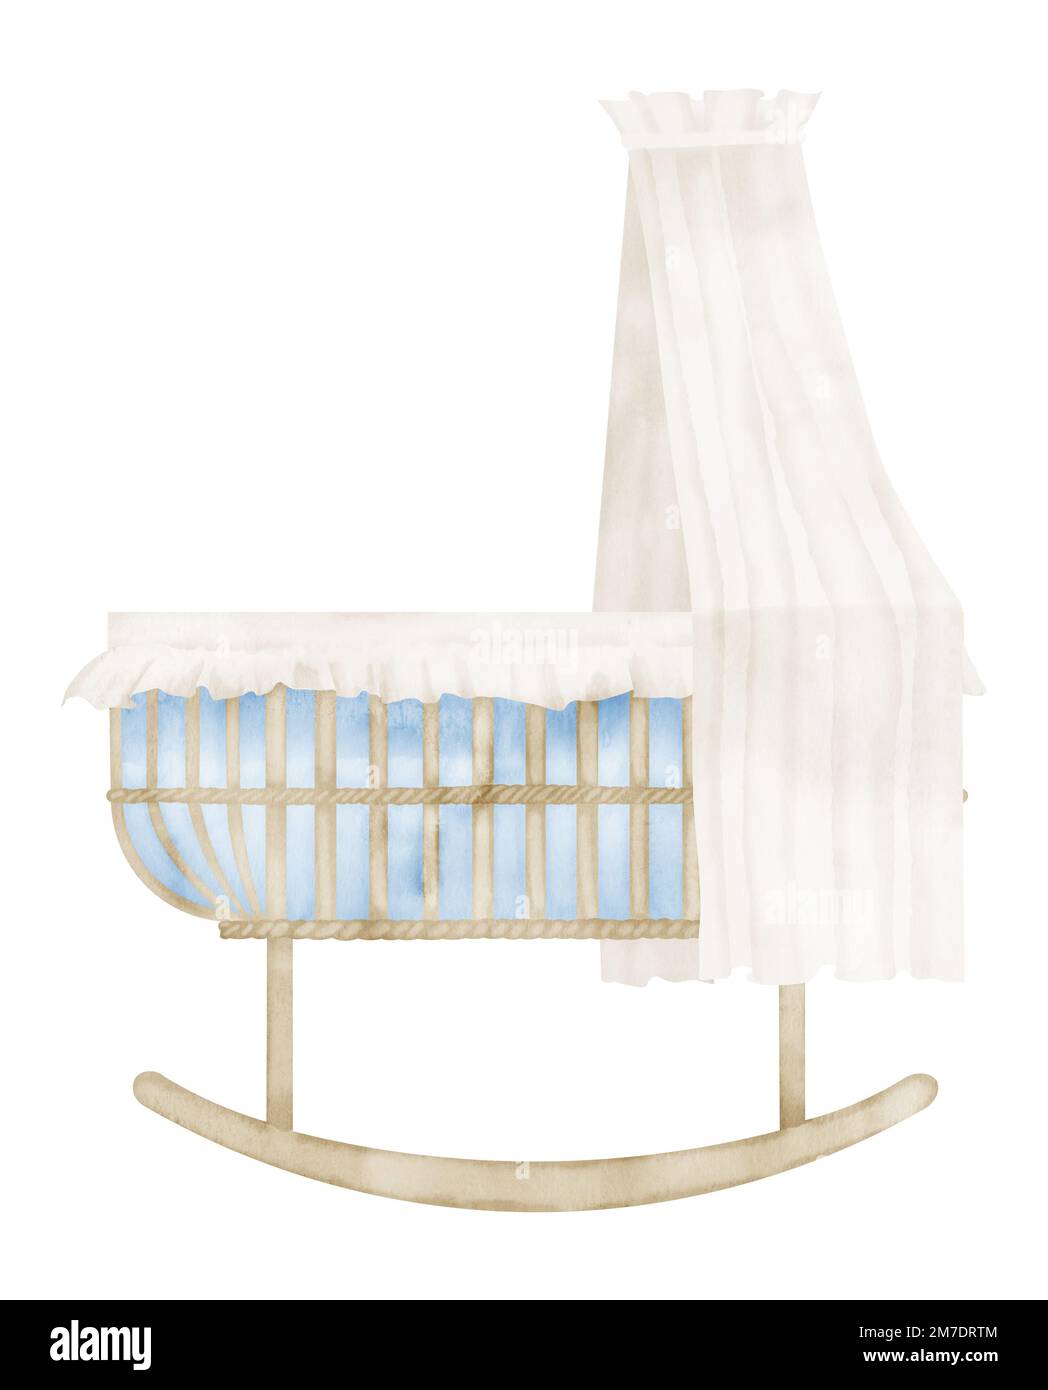 Baby Cradle. Hand drawn Watercolor illustration of Crib for Child. Drawing of bassinet for boy or girl in vintage retro style. Sketch on isolated background in pastel blue and beige colors. Stock Photo